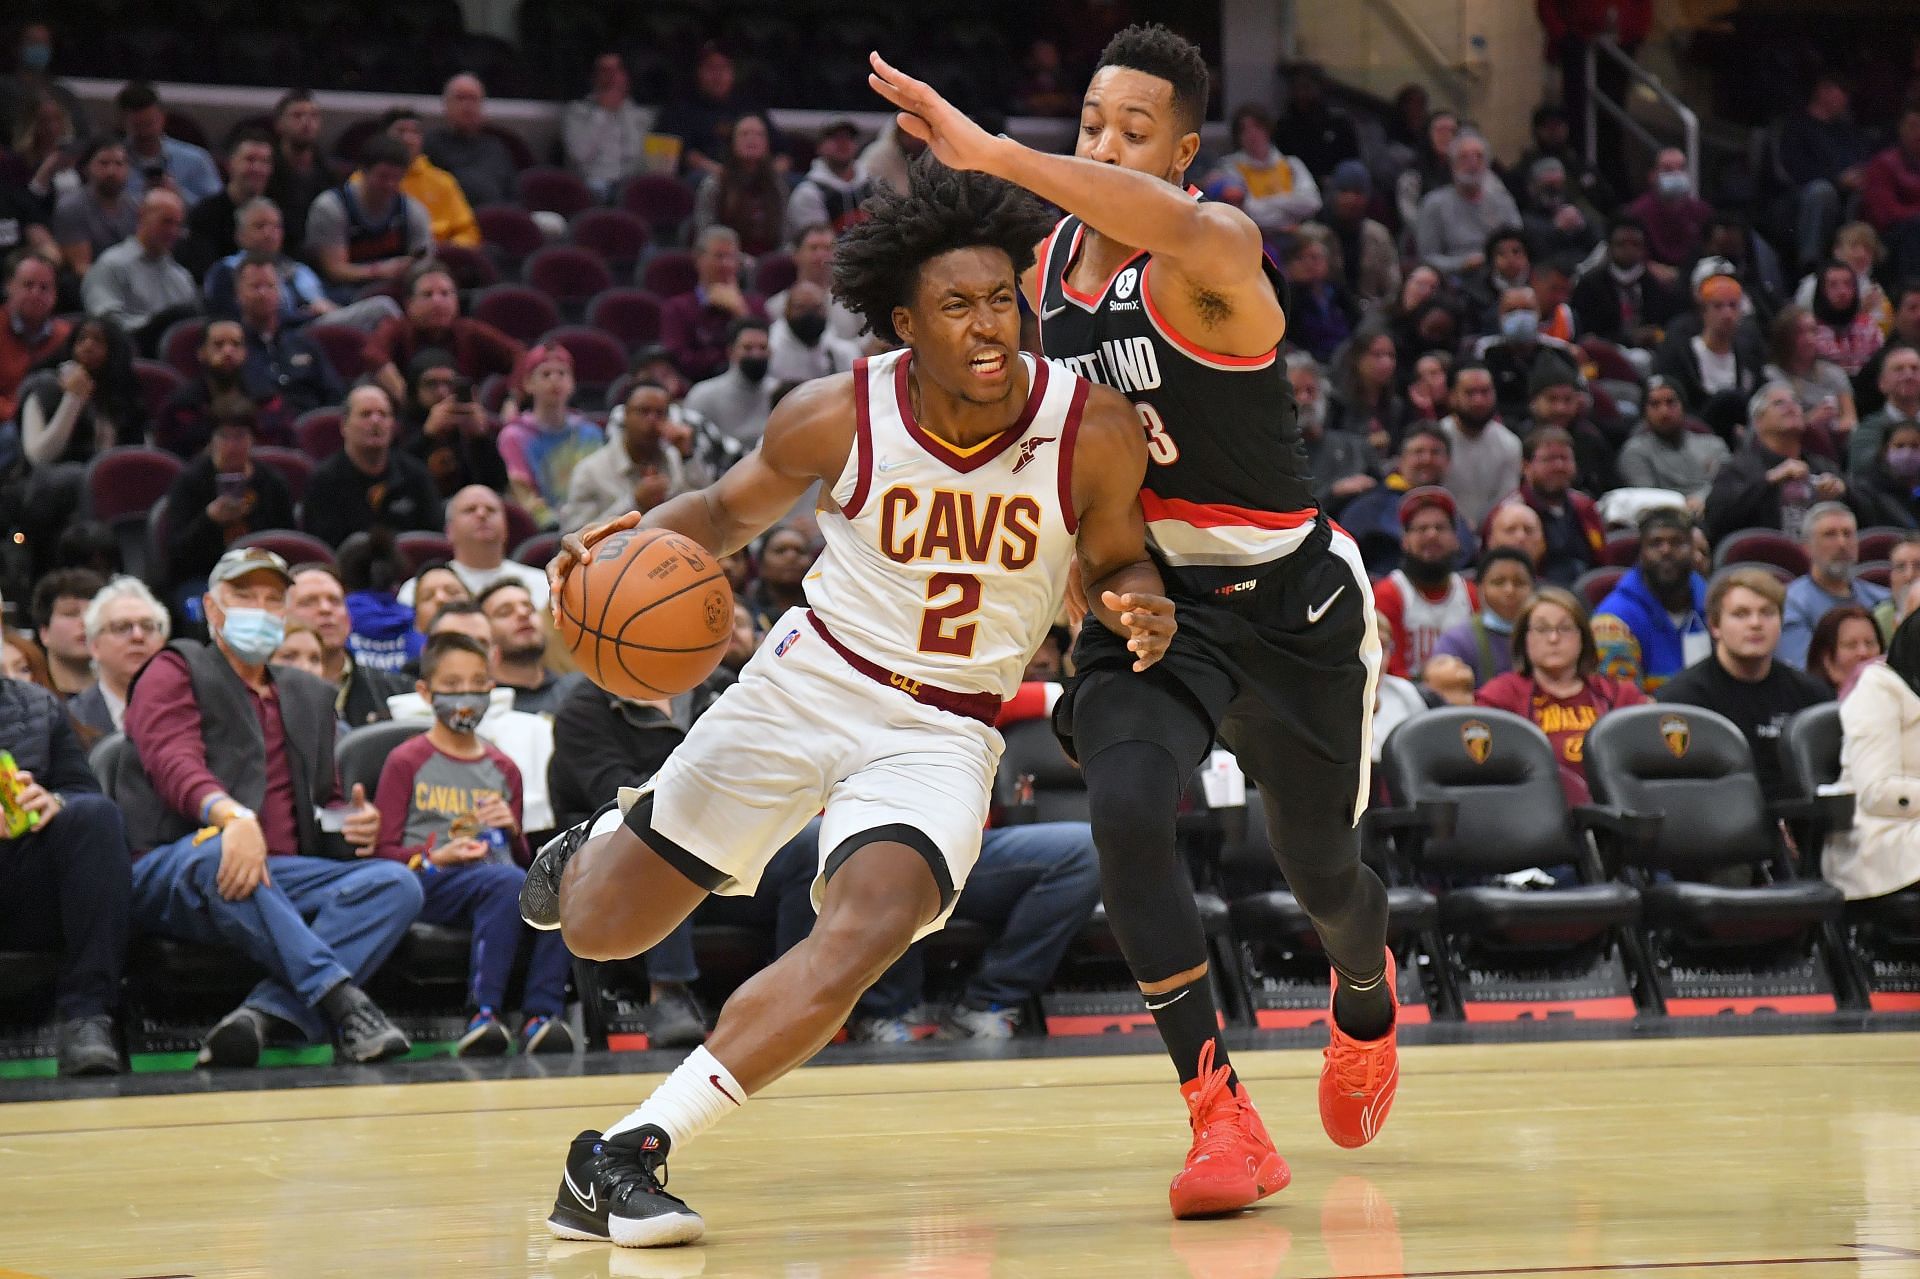 The Cleveland Cavaliers suffered a 94-97 loss to the in-form Washington Wizards in their previous game